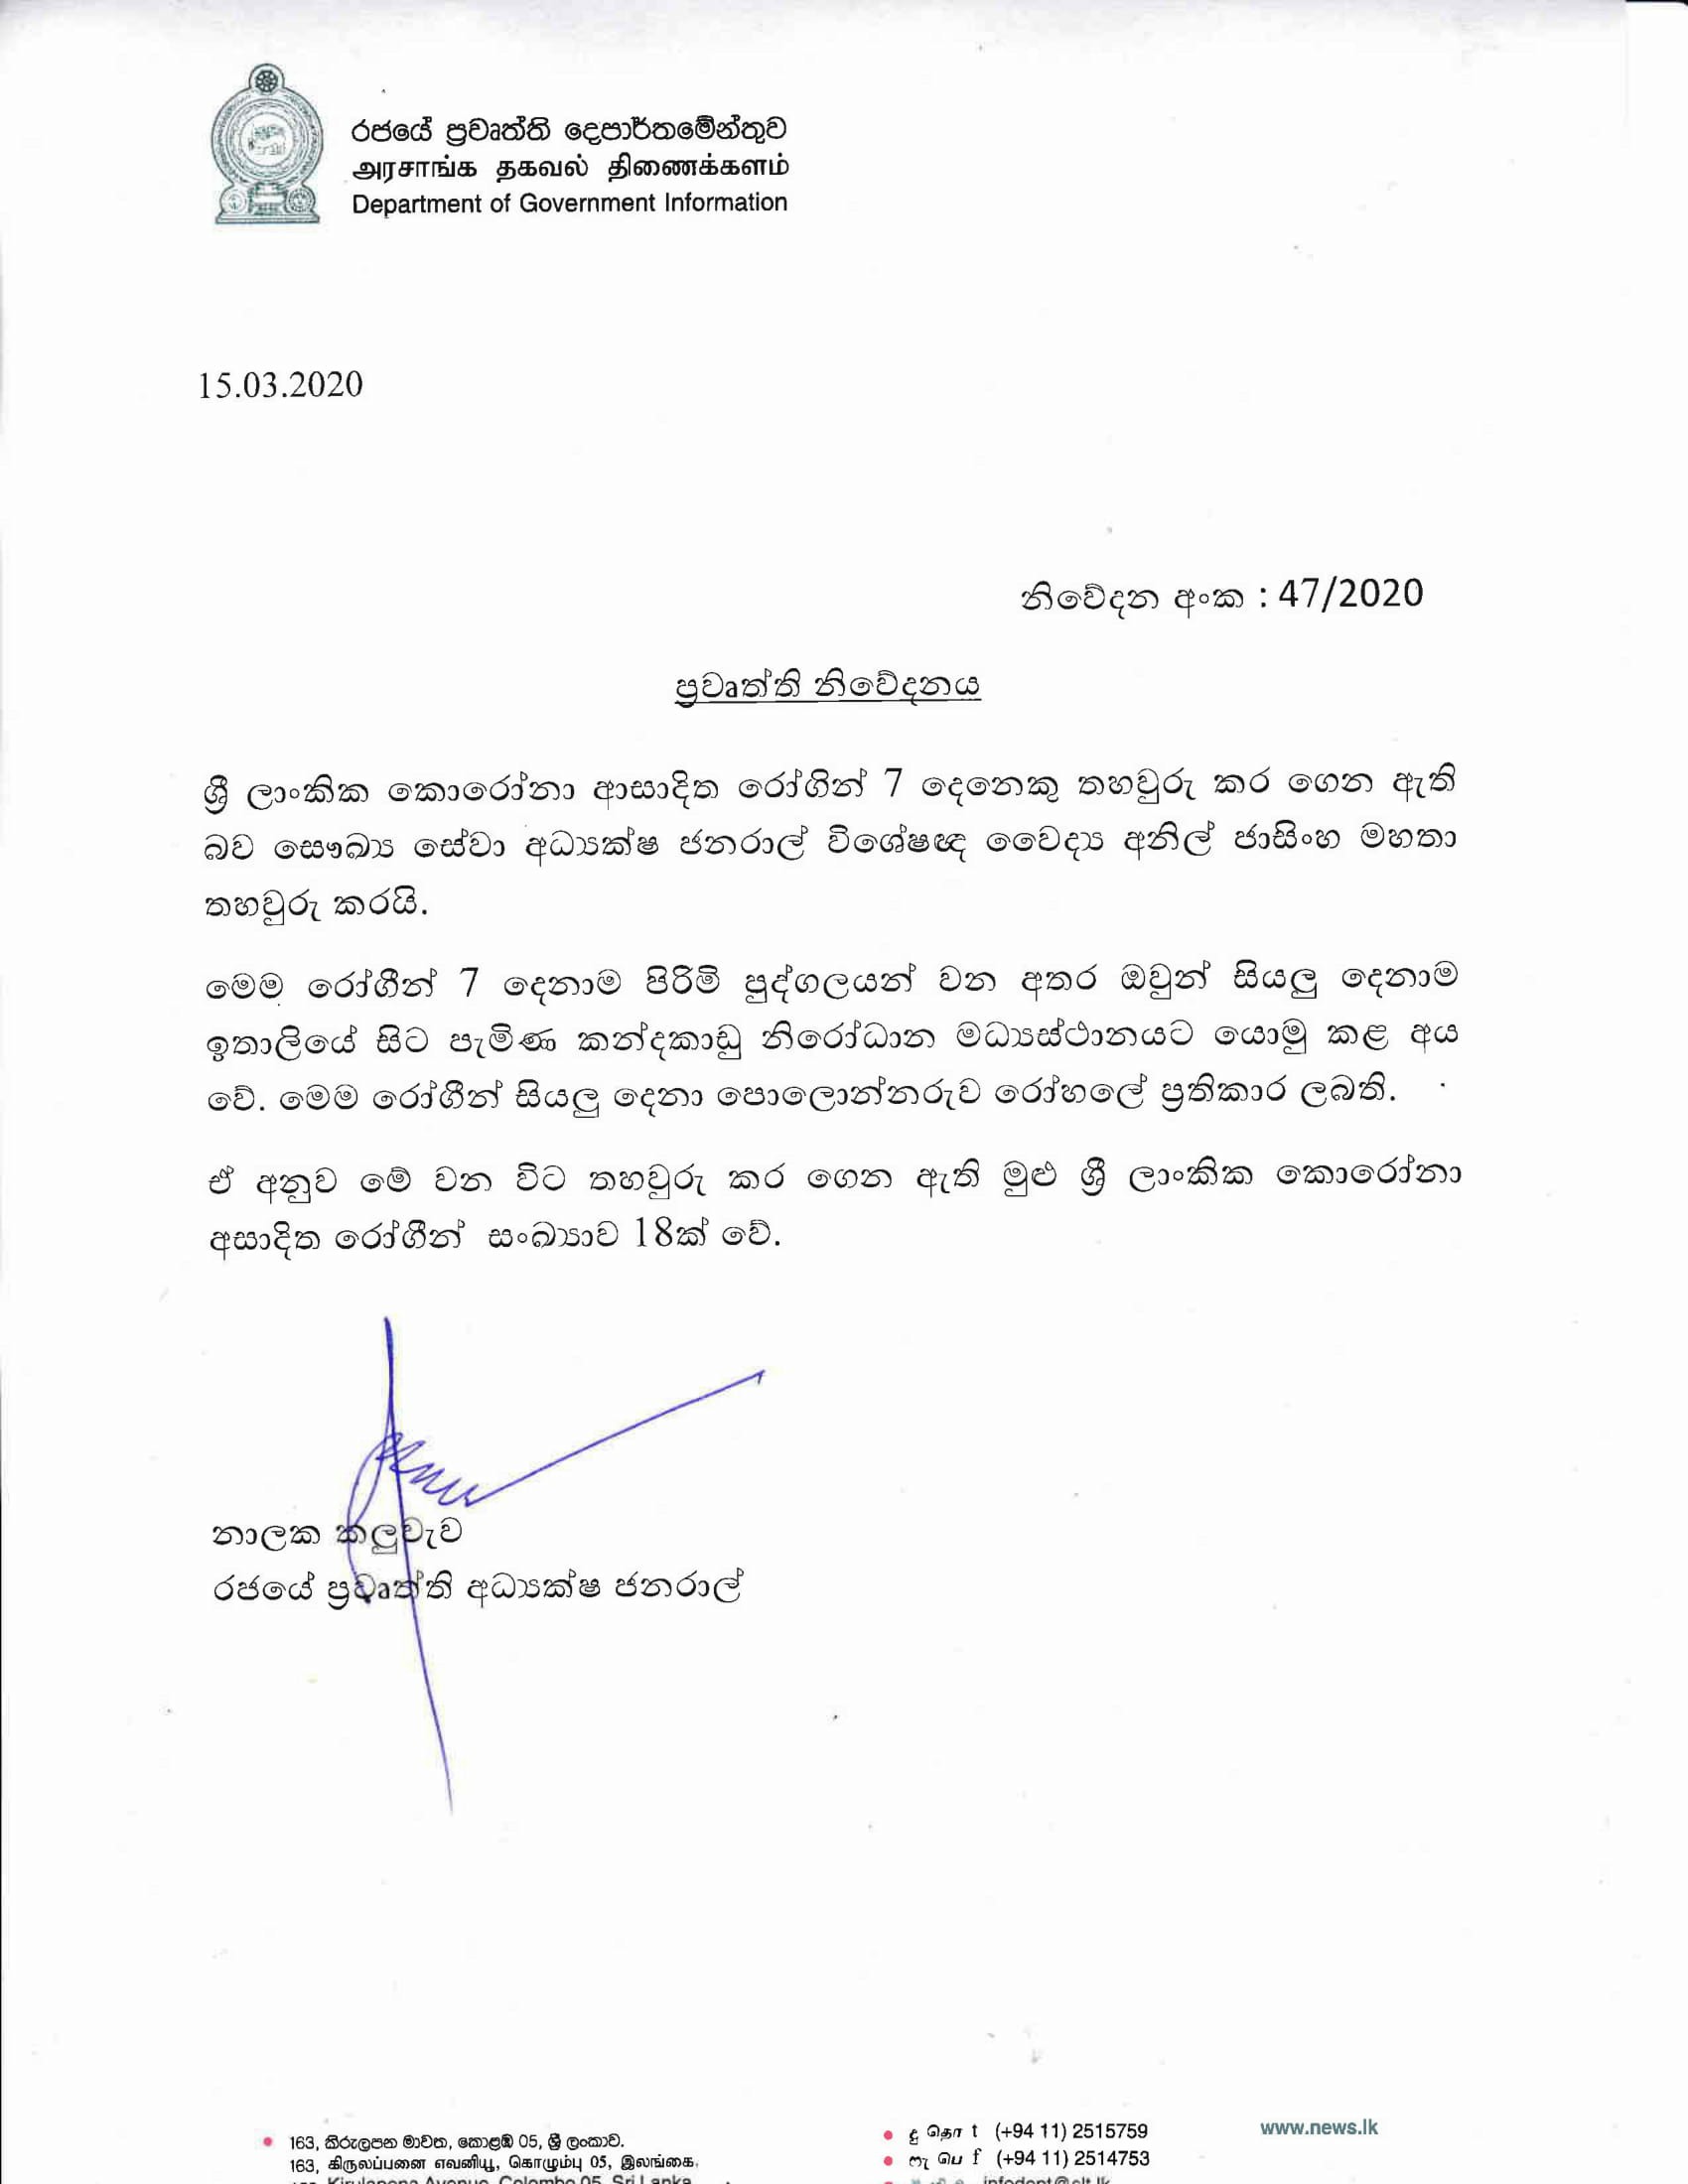 Media Release on 15.03.2020 Release No.47 2020 1